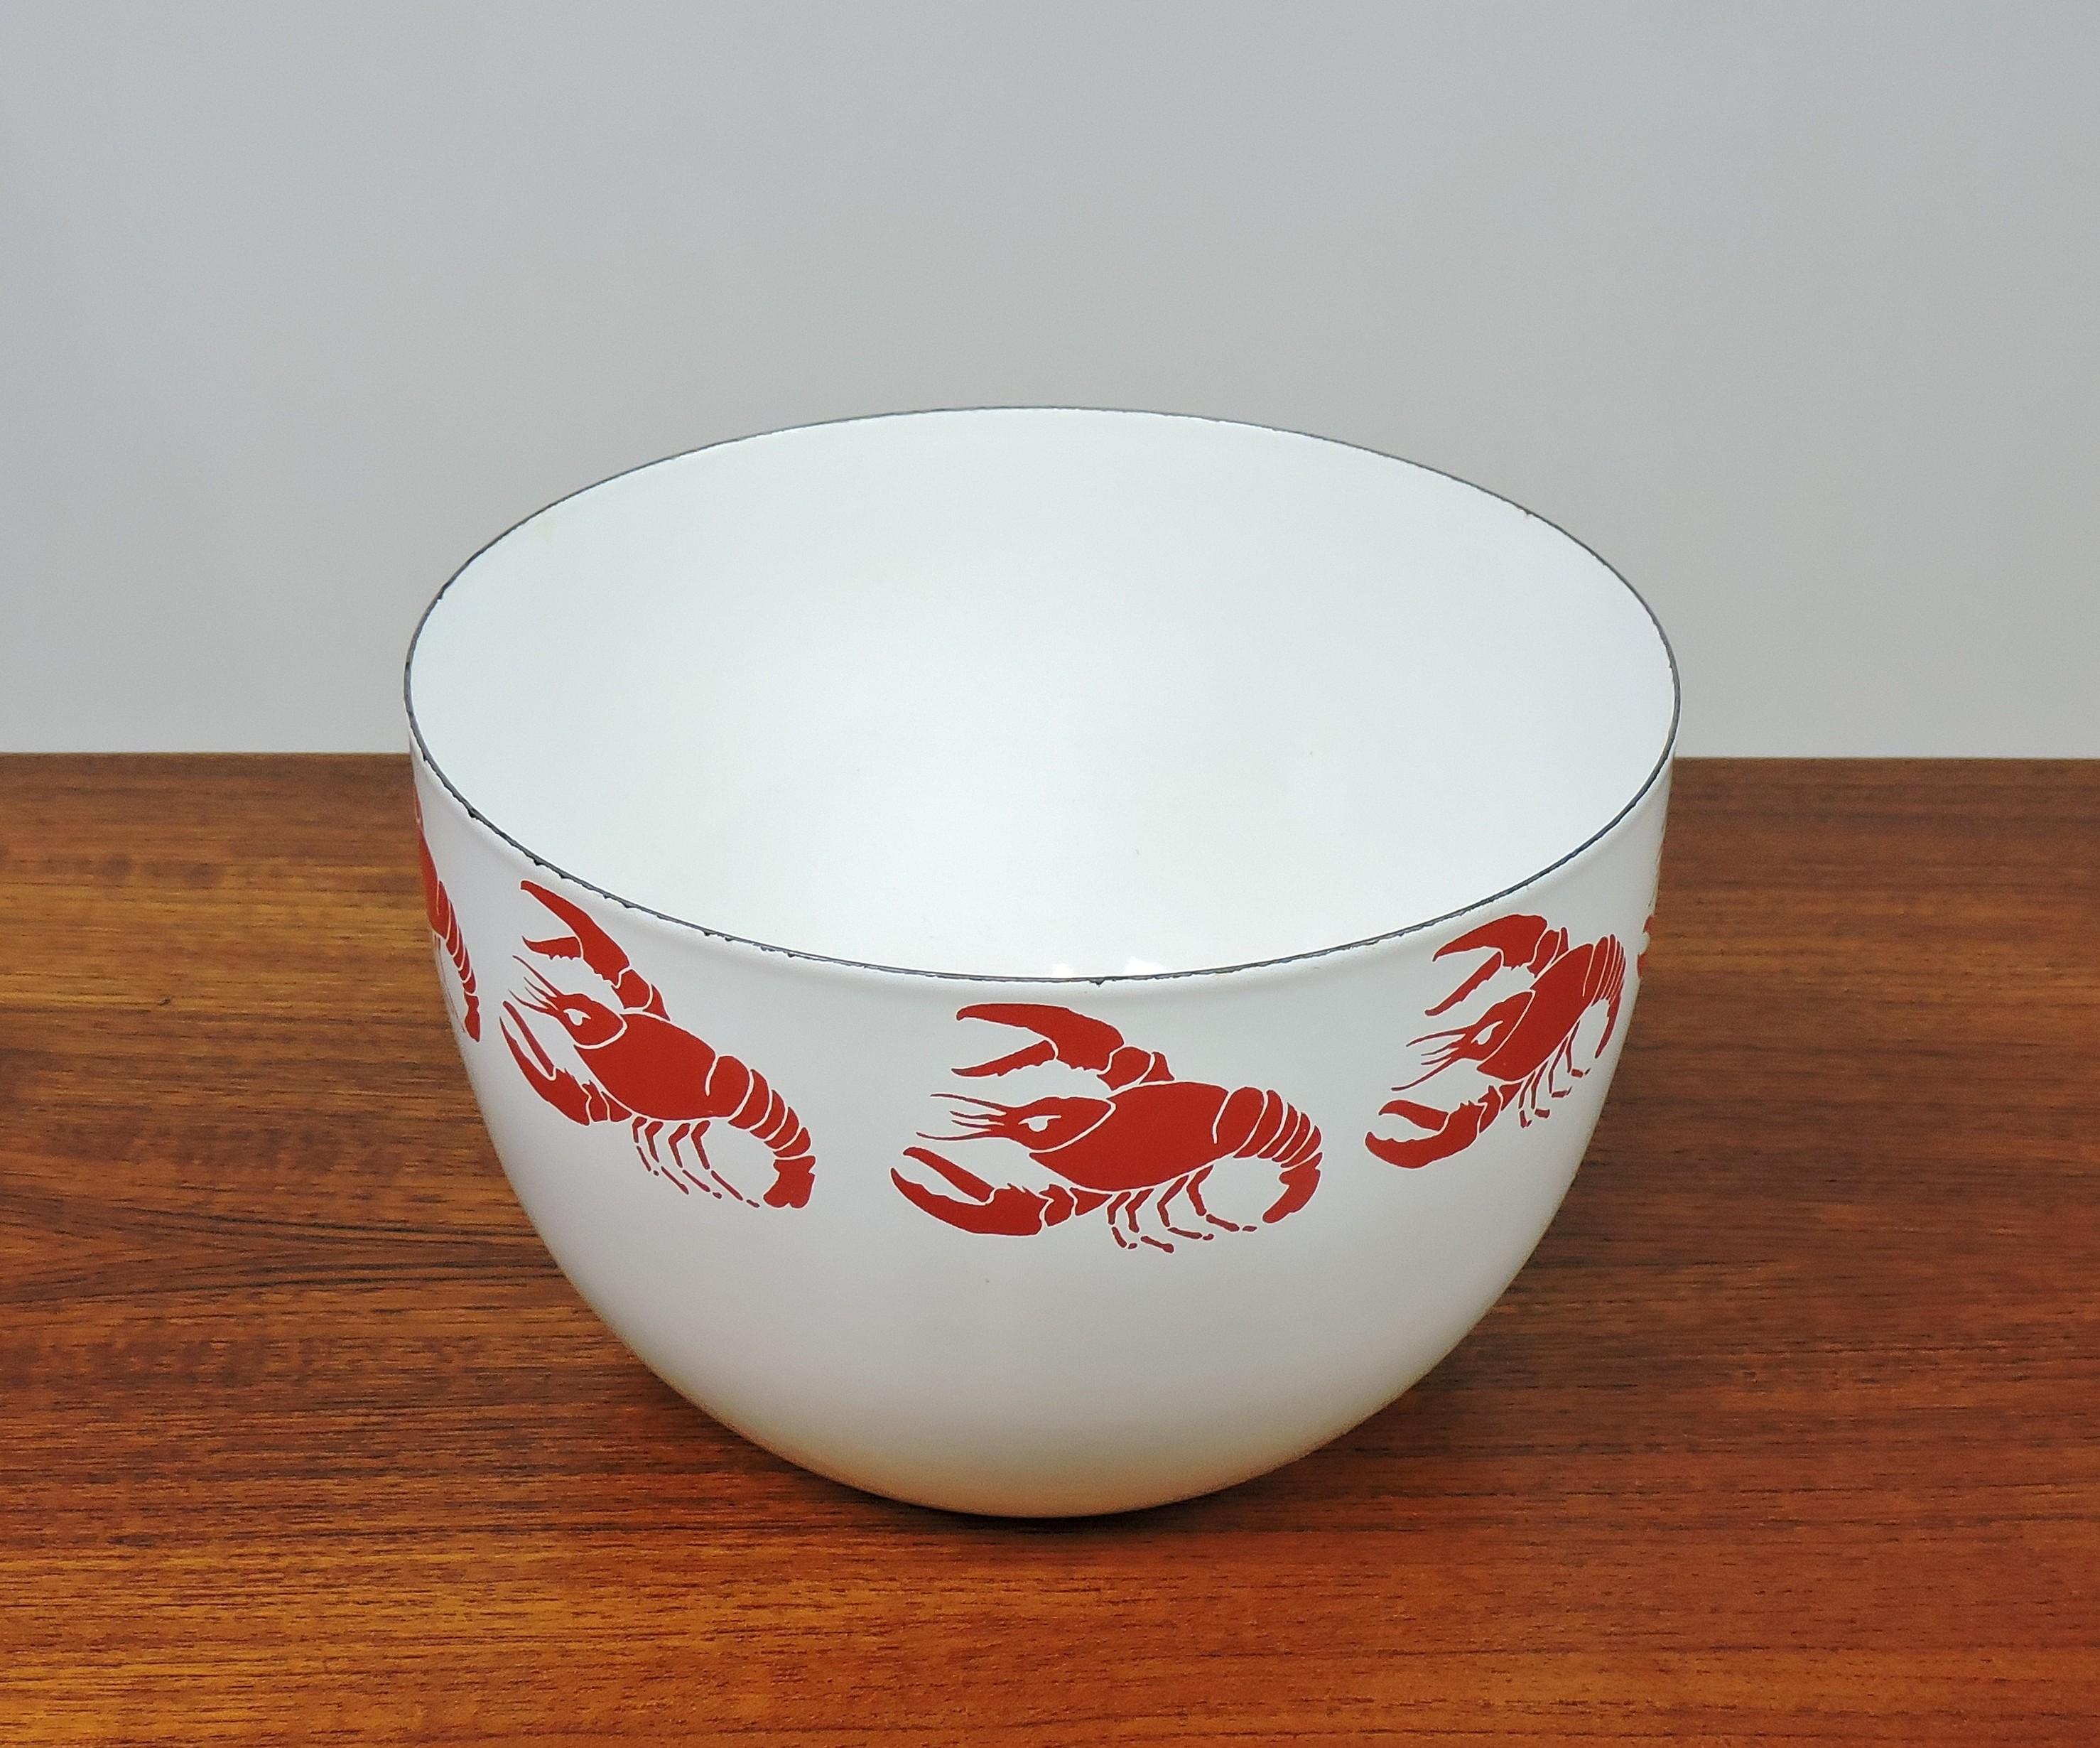 Beautiful enamel on metal bowl by Kaj Franck for Finel Finland. This bowl has a bright red lobster pattern on a white background. A colorful and fun addition to the kitchen!